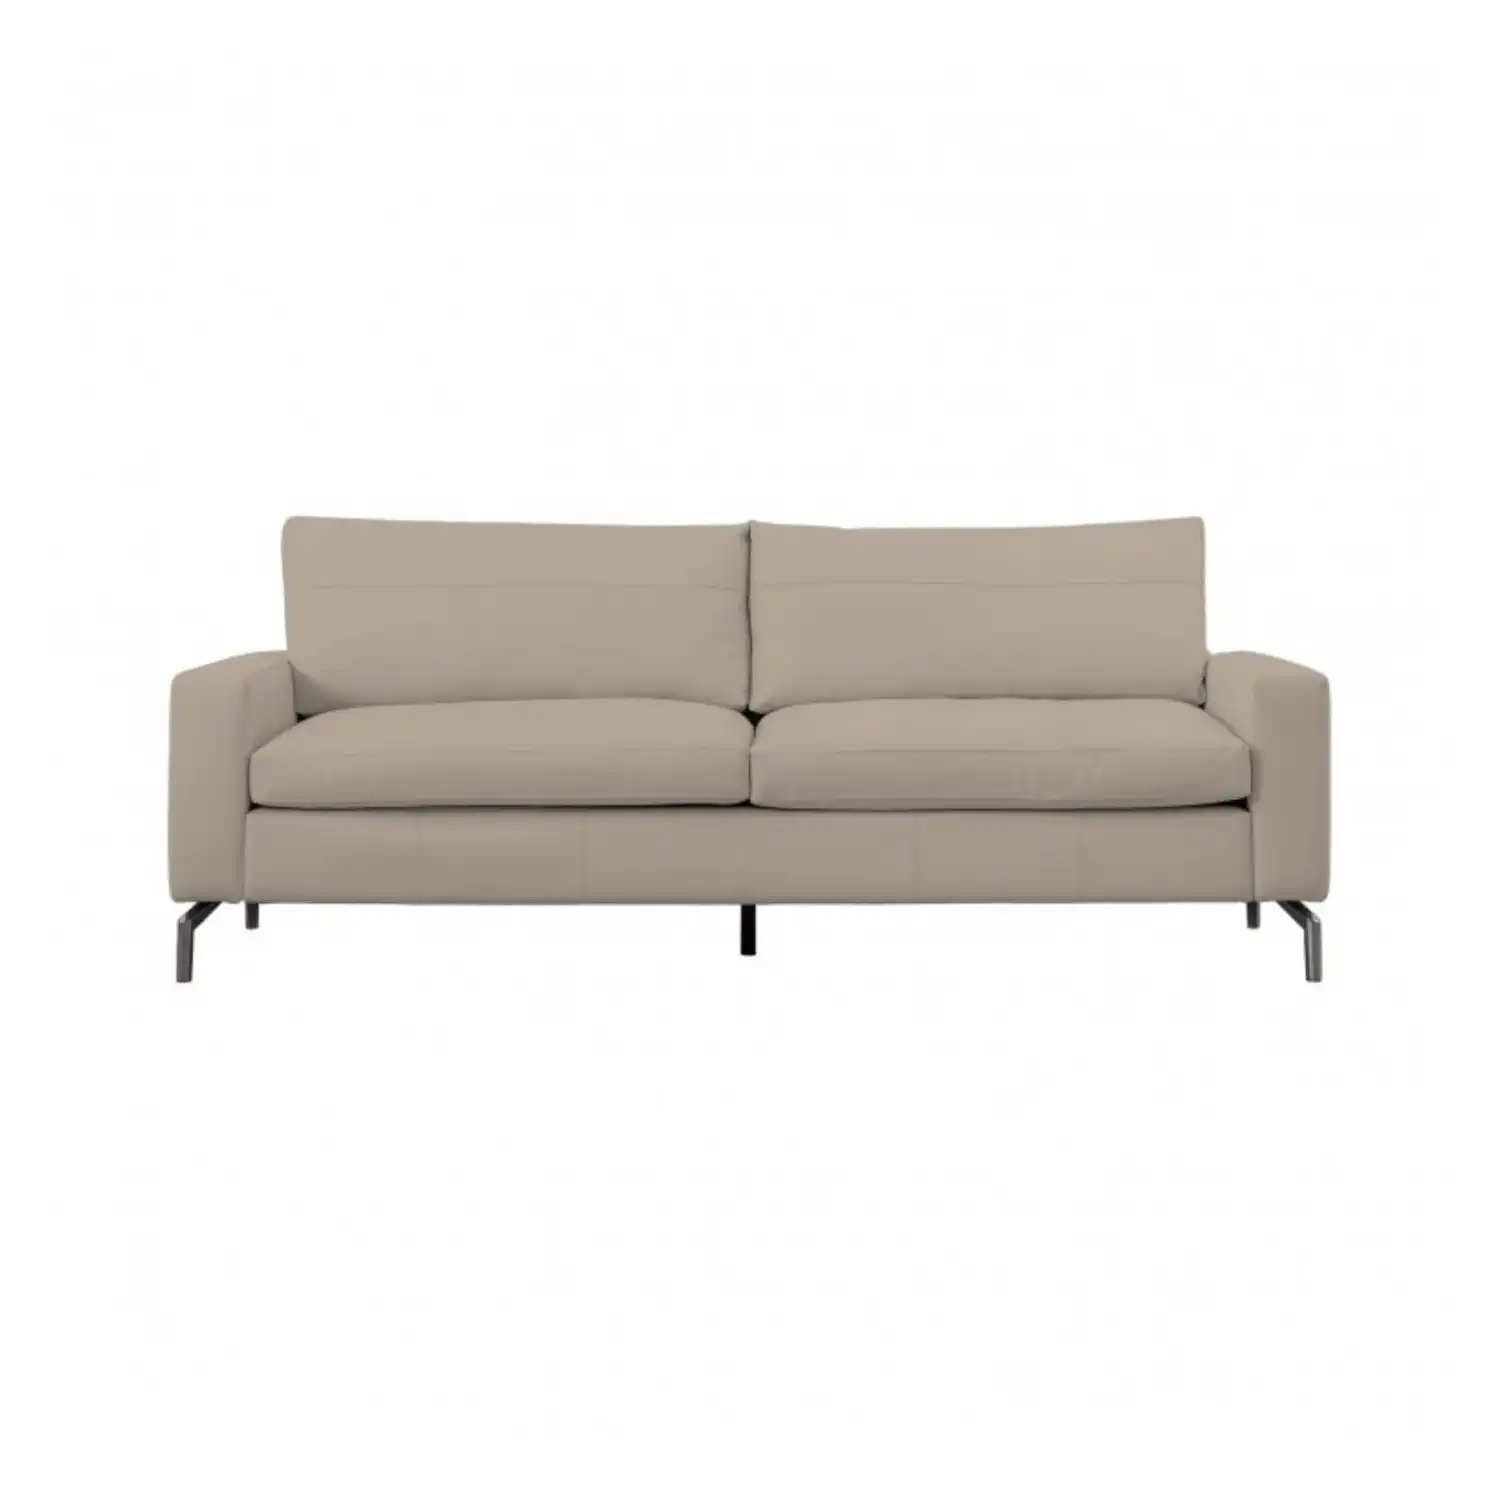 Modern Style Sabino Pebble Faux Leather Upholstered 3 Seater Sofa 86x218cm